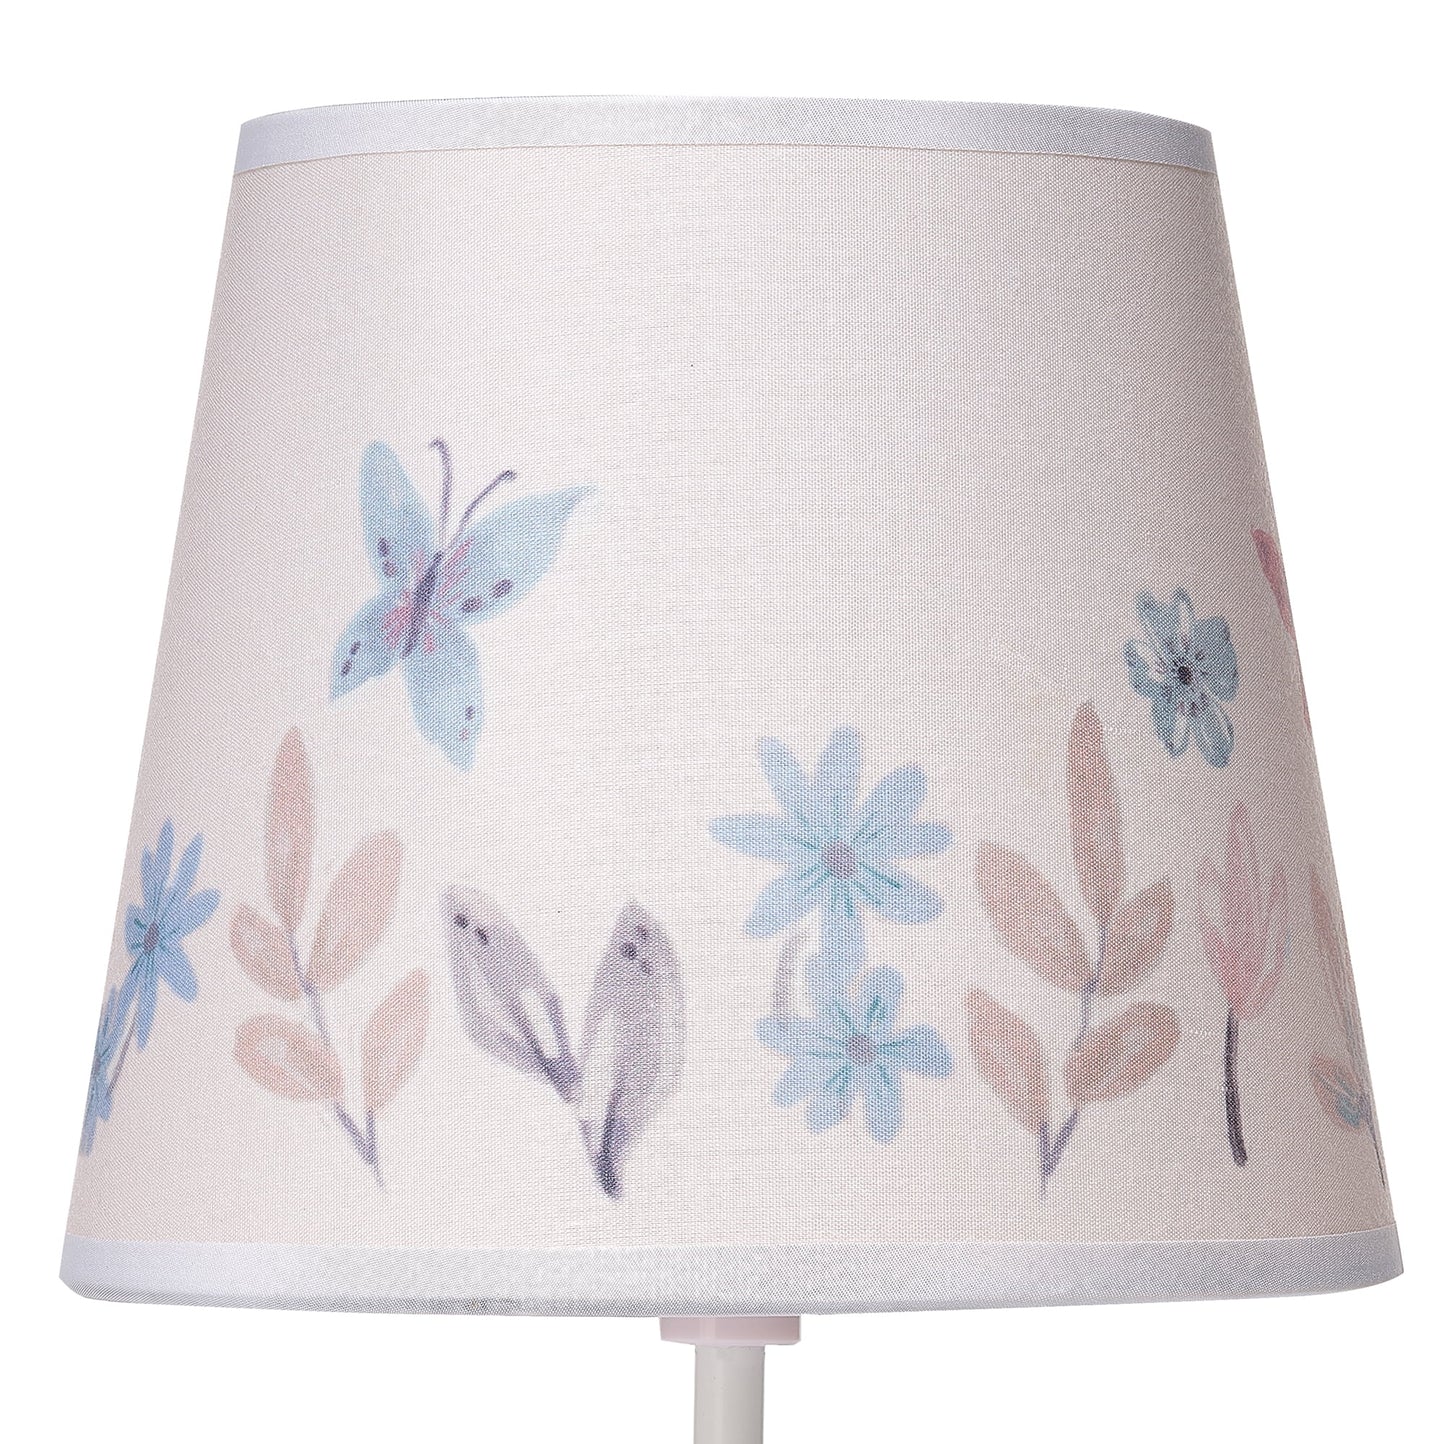 Lambs & Ivy Enchanted Garden Butterfly Lamp with Floral Shade